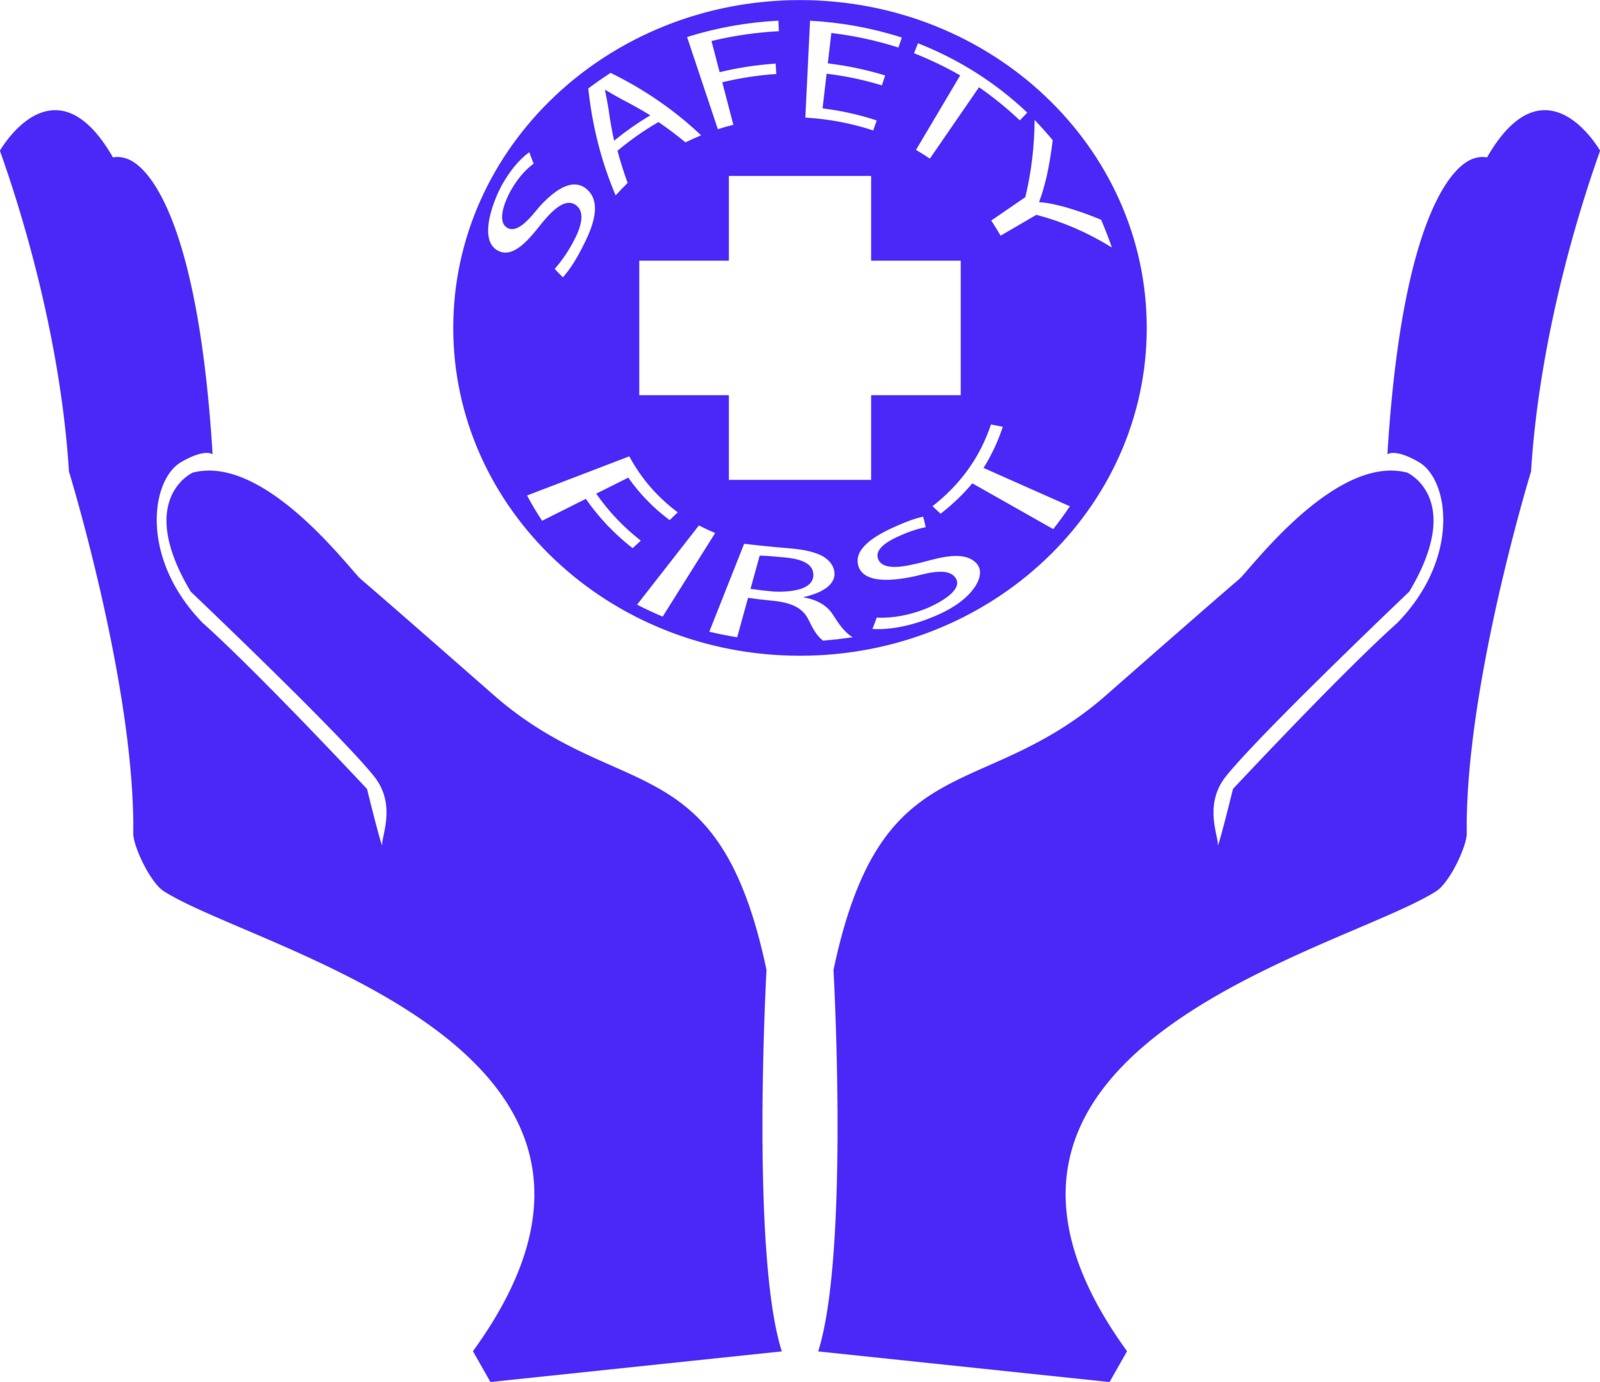 safety first, the logo for Environmental Health Safety by ardeann